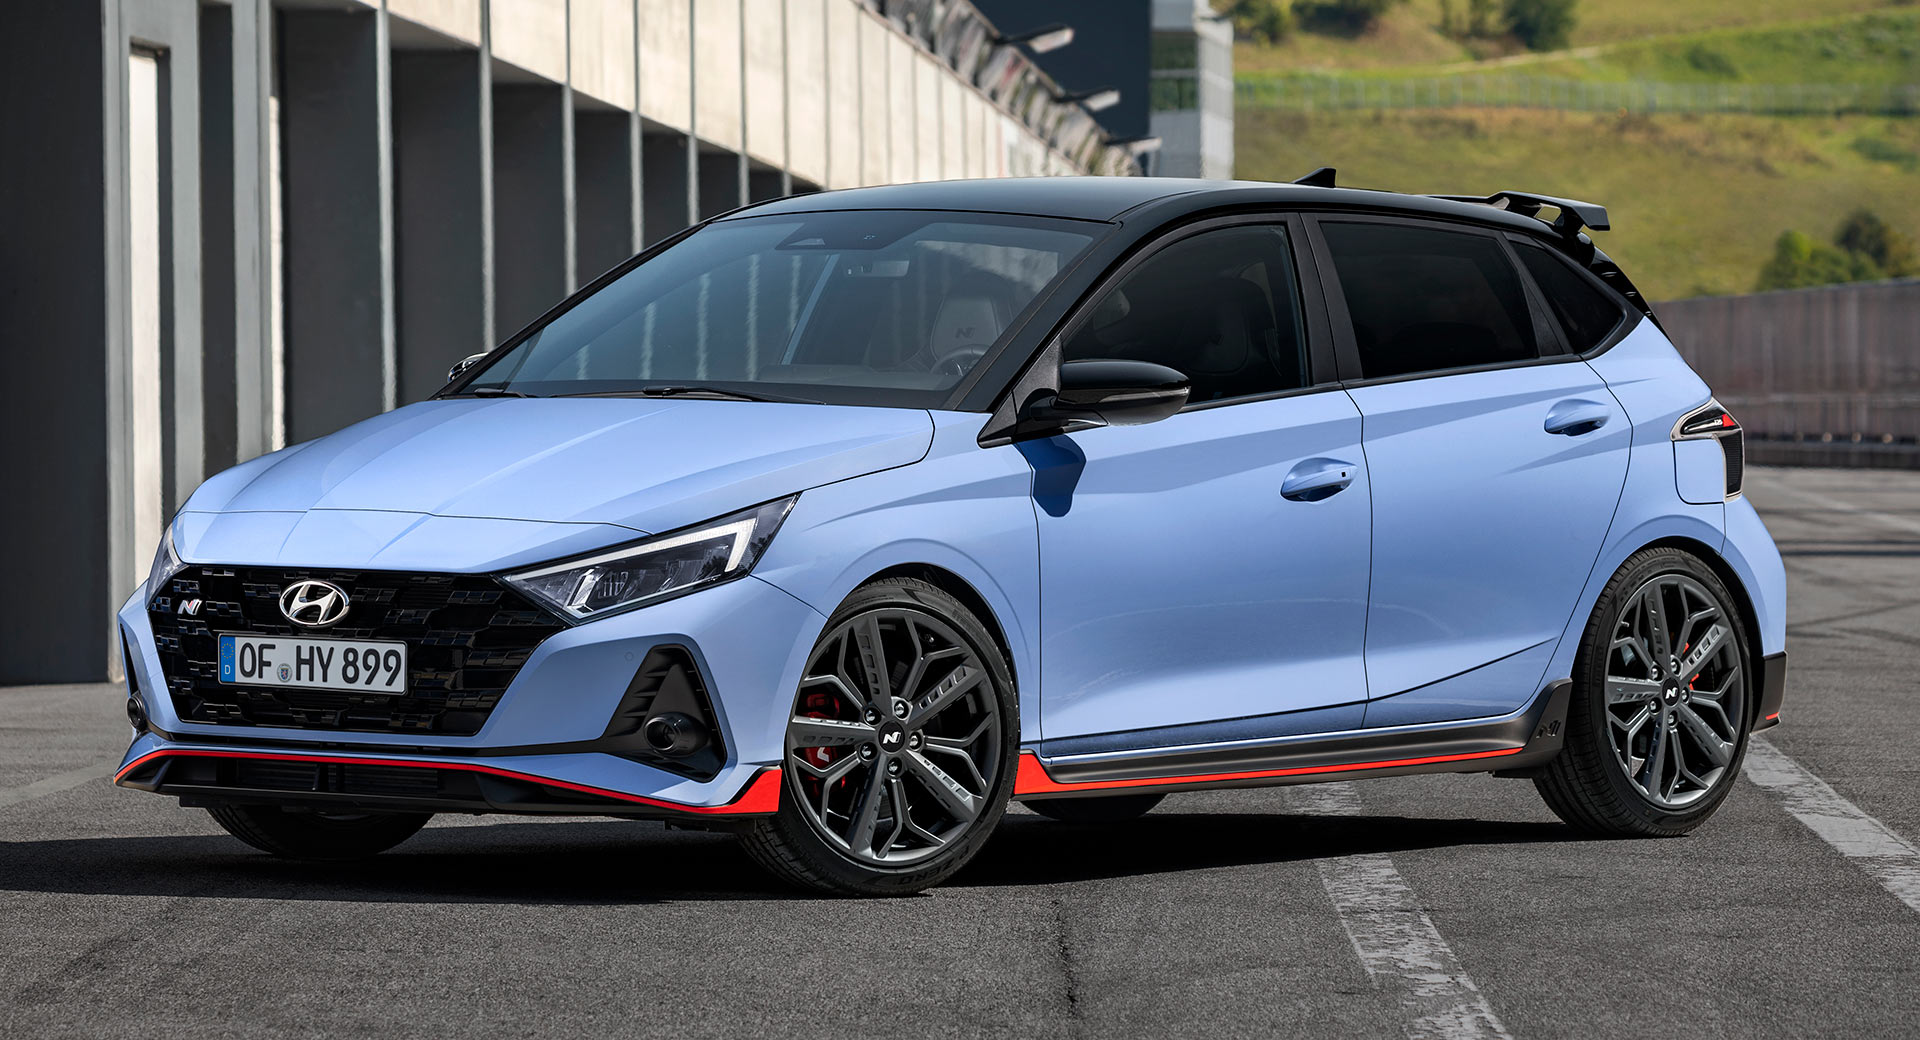 2021 Hyundai i20 N Is Here To Shake Up The Hot Hatch